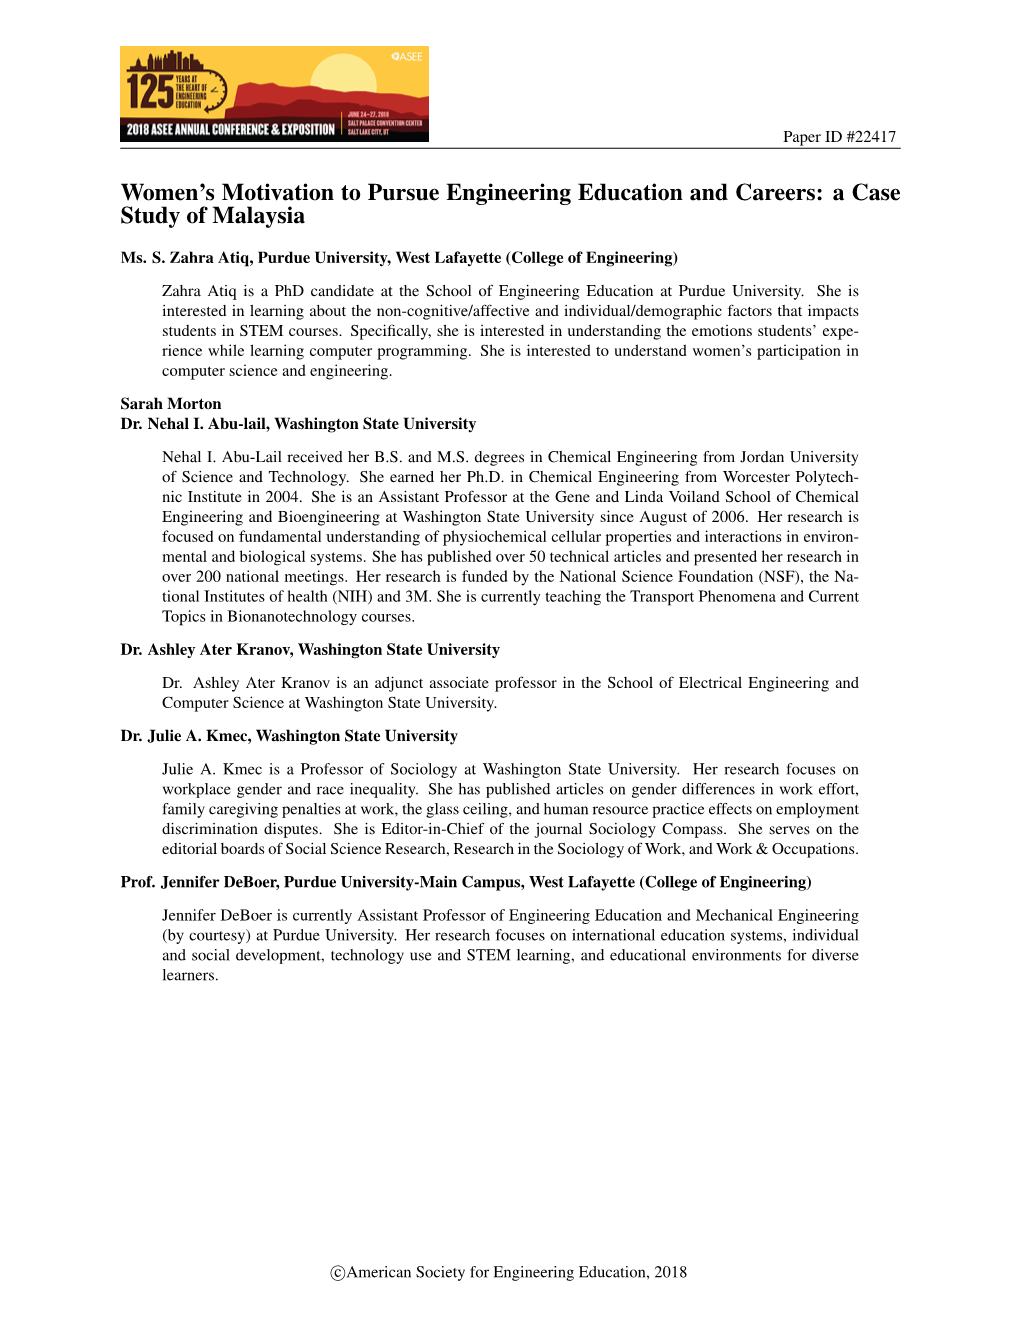 Women's Motivation to Pursue Engineering Education and Careers: a Case Study of Malaysia